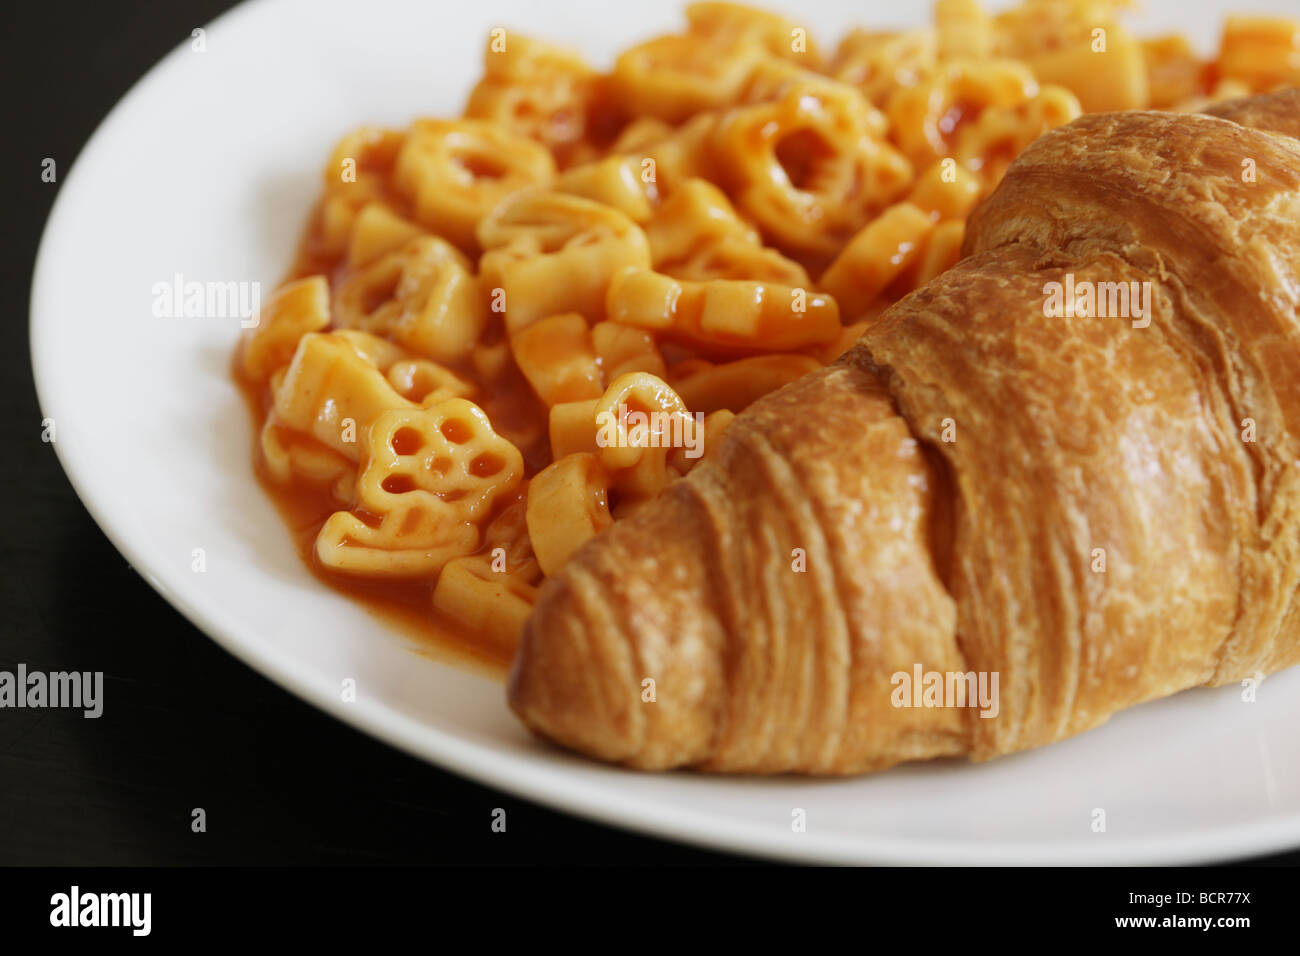 Croissant with Pasta Shapes Stock Photo